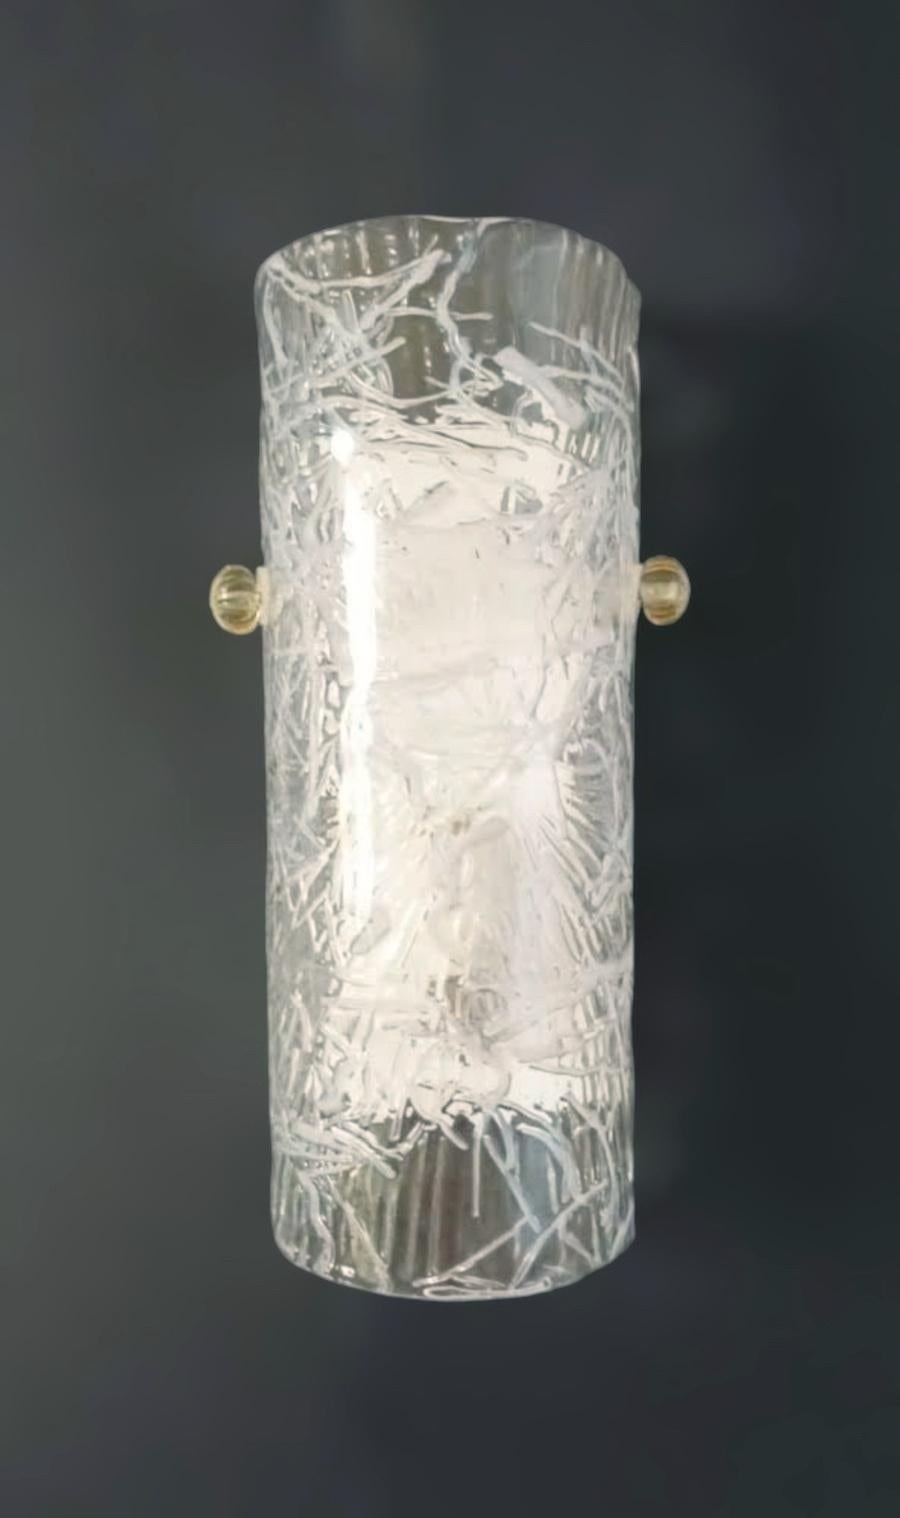 Italian wall light with a cylinder Murano glass shade in clear color with white texture, mounted on white metal frame / Made in Italy by Mazzega 1970s
Measures: Height 12 inches, width 6 inches, depth 3.5 inches
1 light / E12 or E14 type / max